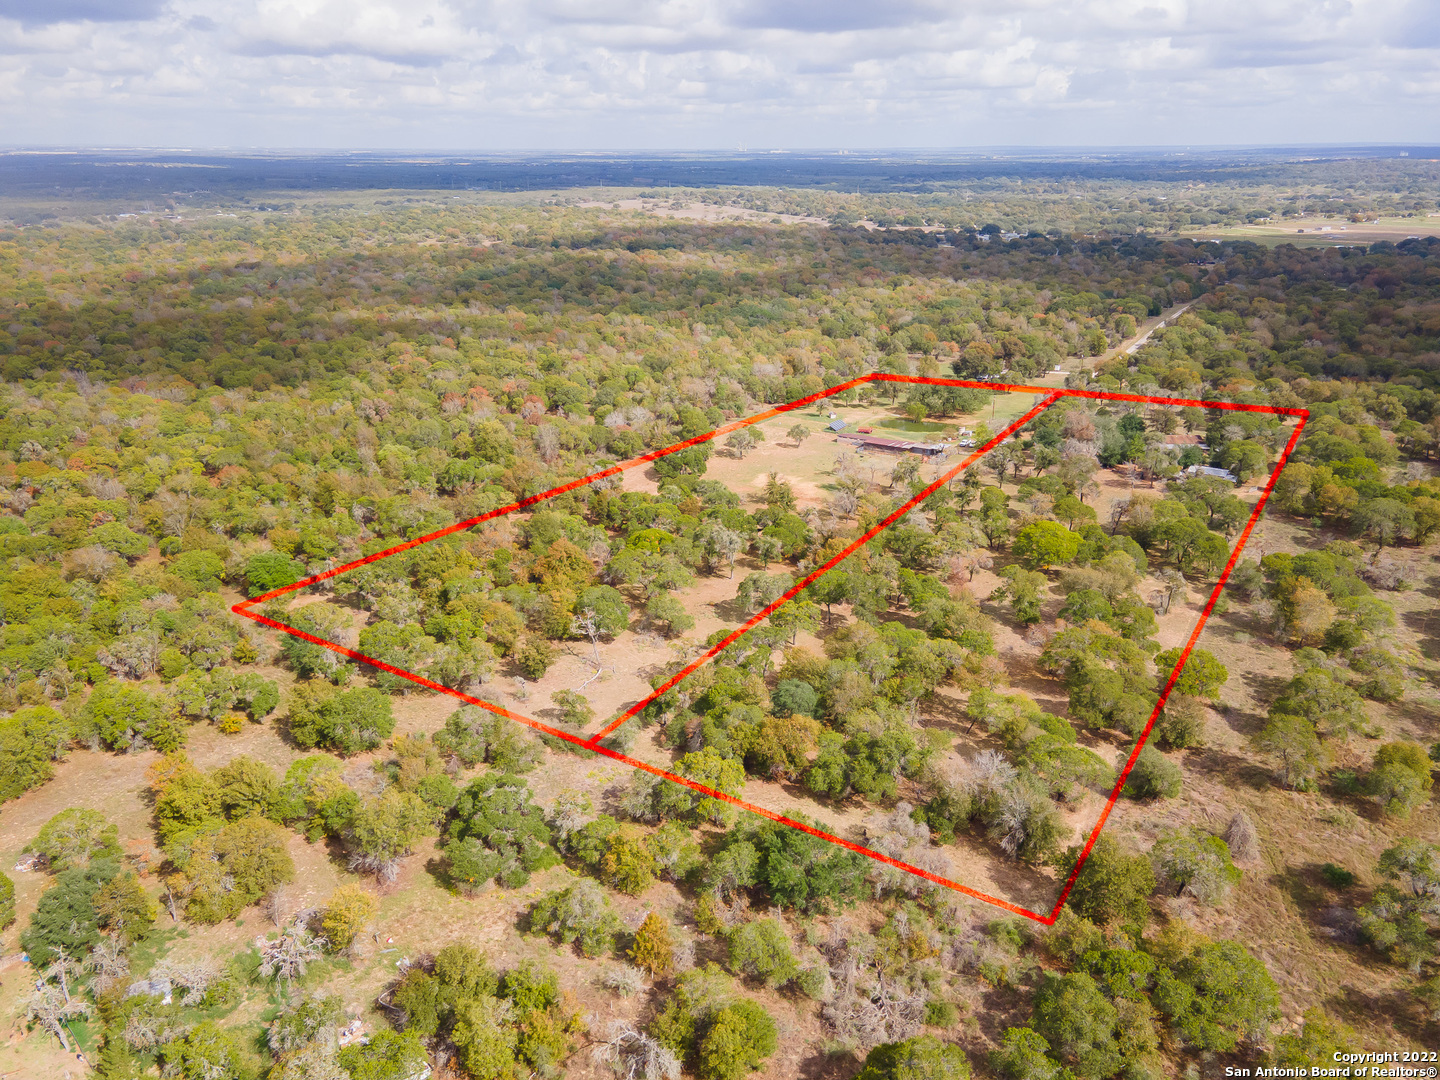 Are you ready to slip away from the city life, noise, and traffic? If so, this is the place for you! 21+ Ag exempt acres in San Antonio, TX, just off Hwy 1604.  No restrictions or city taxes.  Great location with endless possibilities! The view is amazing with a stock tank pond sitting in the middle of the field. This unique property also includes a 6 stable horse barn, 8 dog kennels with runs, and chicken coops. The home home is a three bedroom with two full bathrooms and is equipped with 24 solar panels. This property also has an additional space for a second home with electric and septic already in place.  The entire property is fenced and cross fenced for livestock.  Current Manufactured home on the property does not convey with the sale.